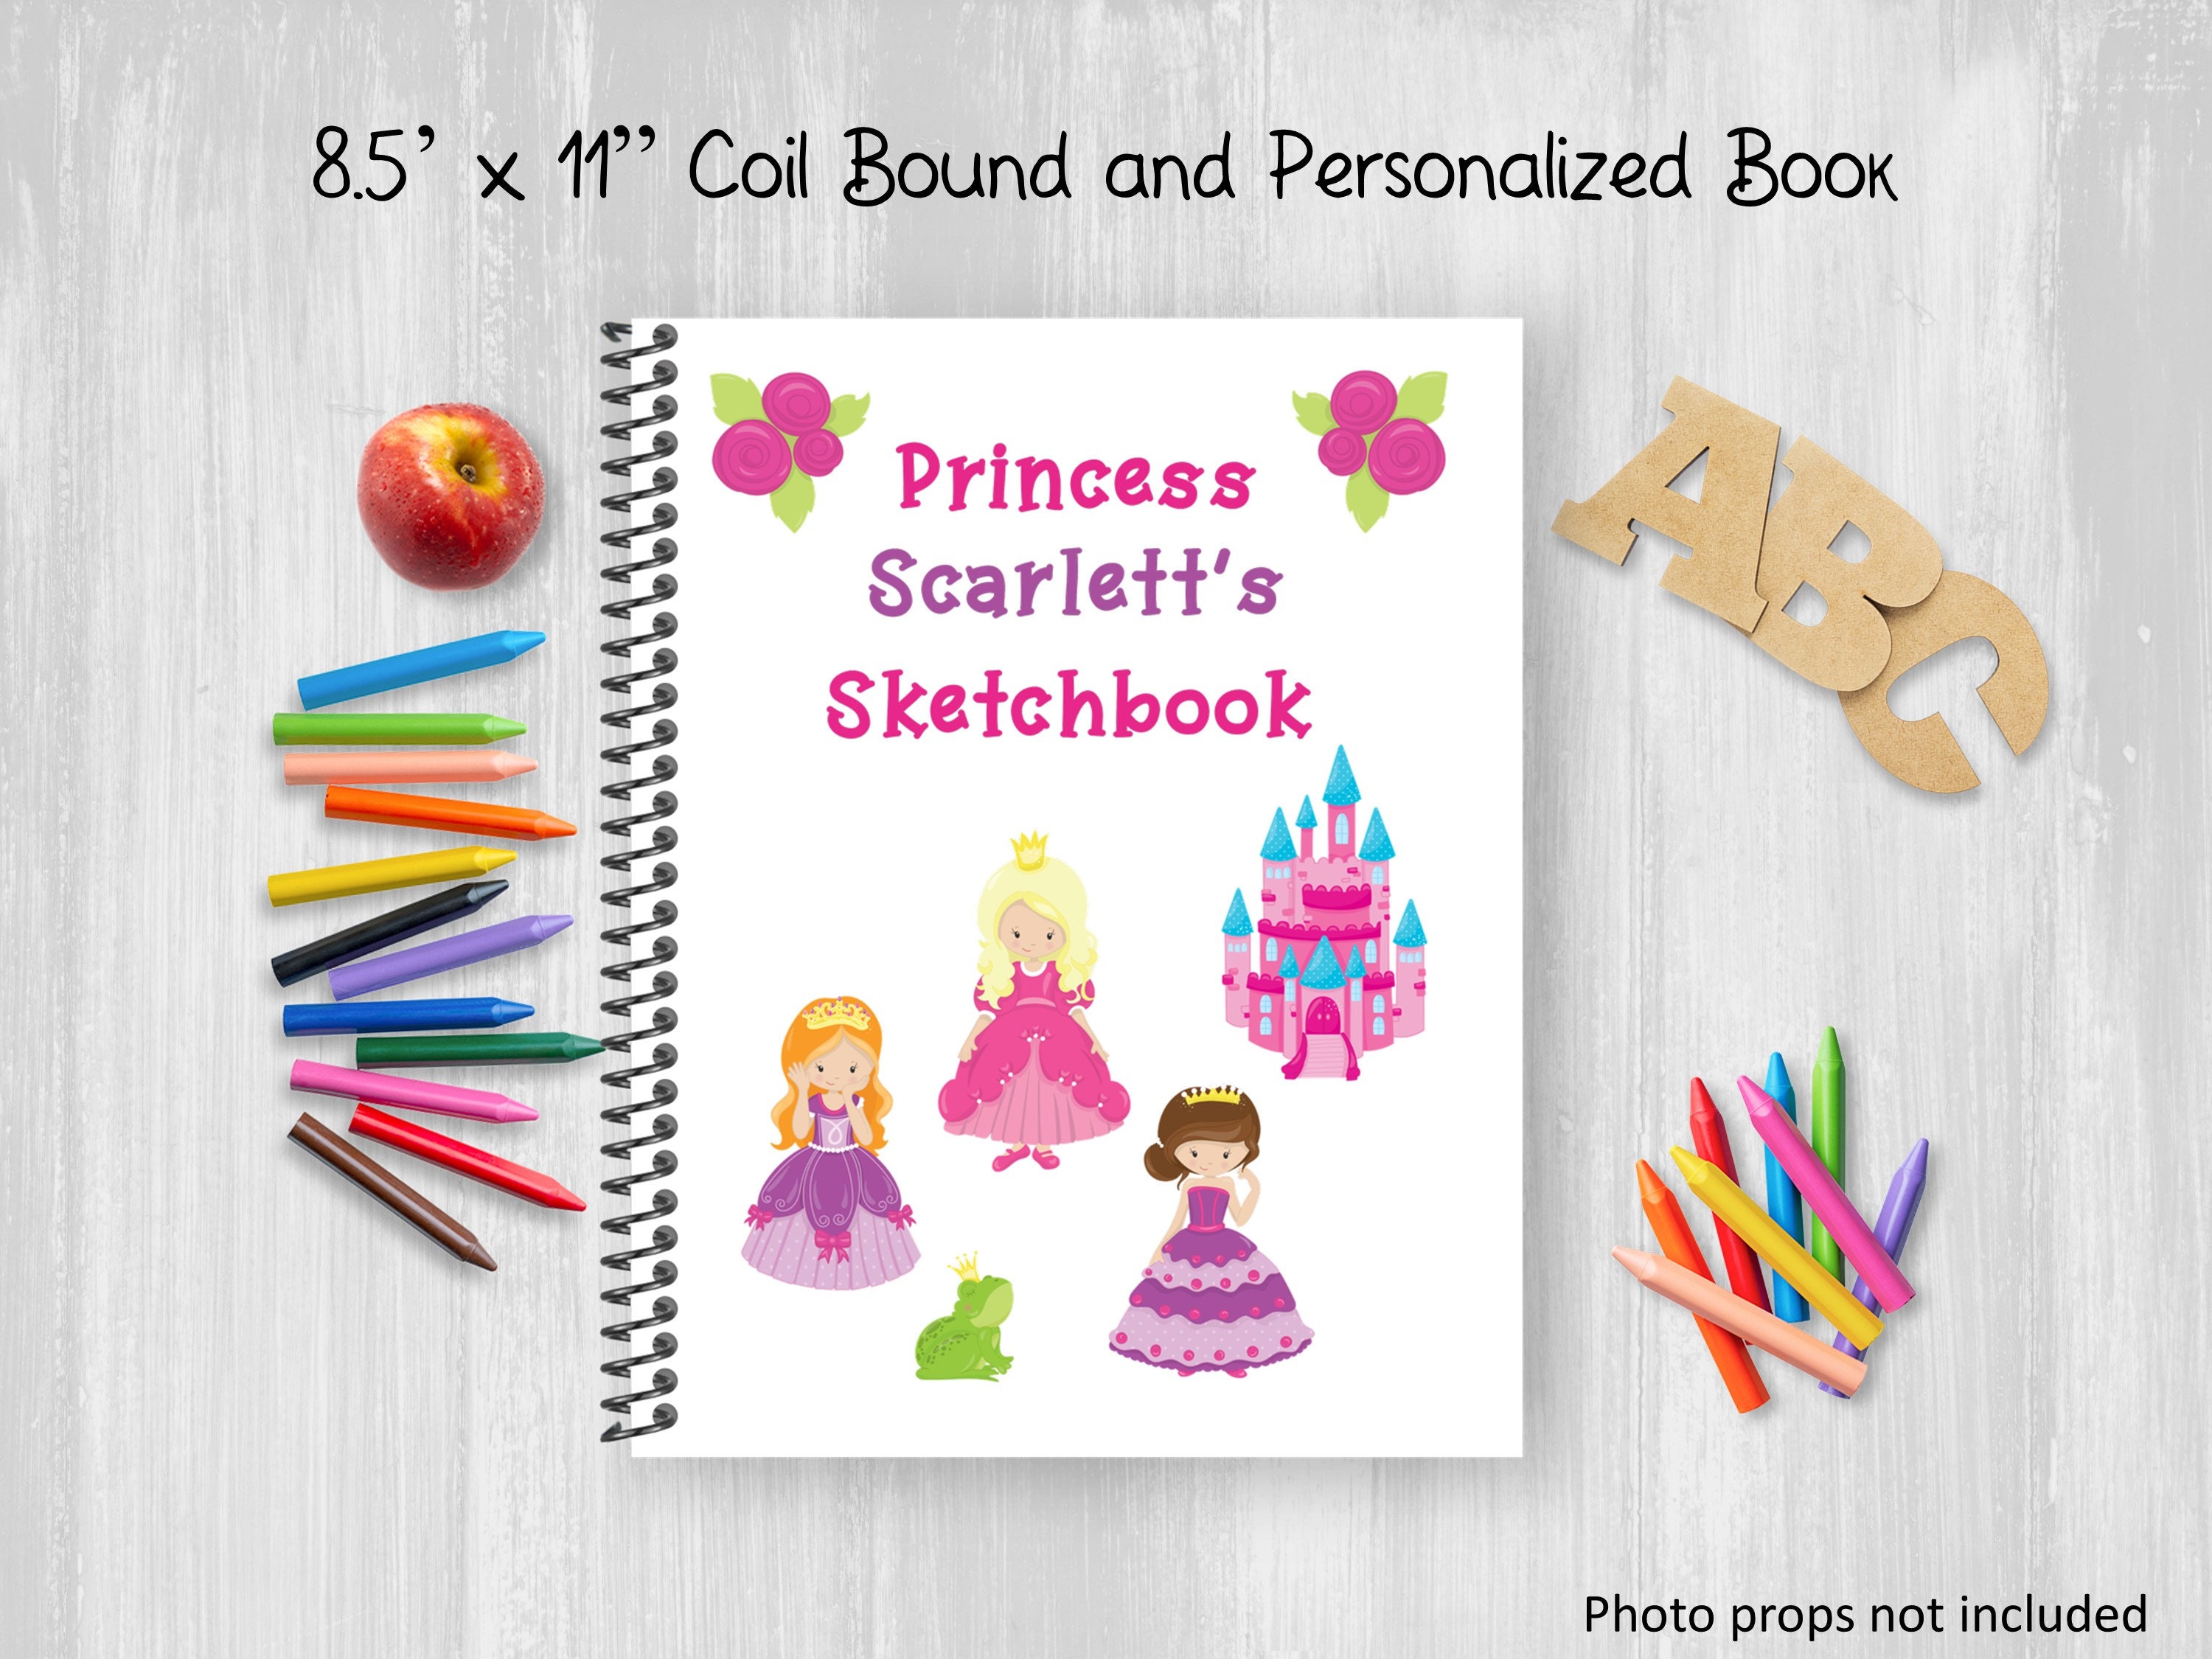 Personalized Sketchbook, Princess Fairy Tales Notebook, Coil Bound, Write  Stories, Drawing Journal, Book for Kids or Teens, Customize Name 